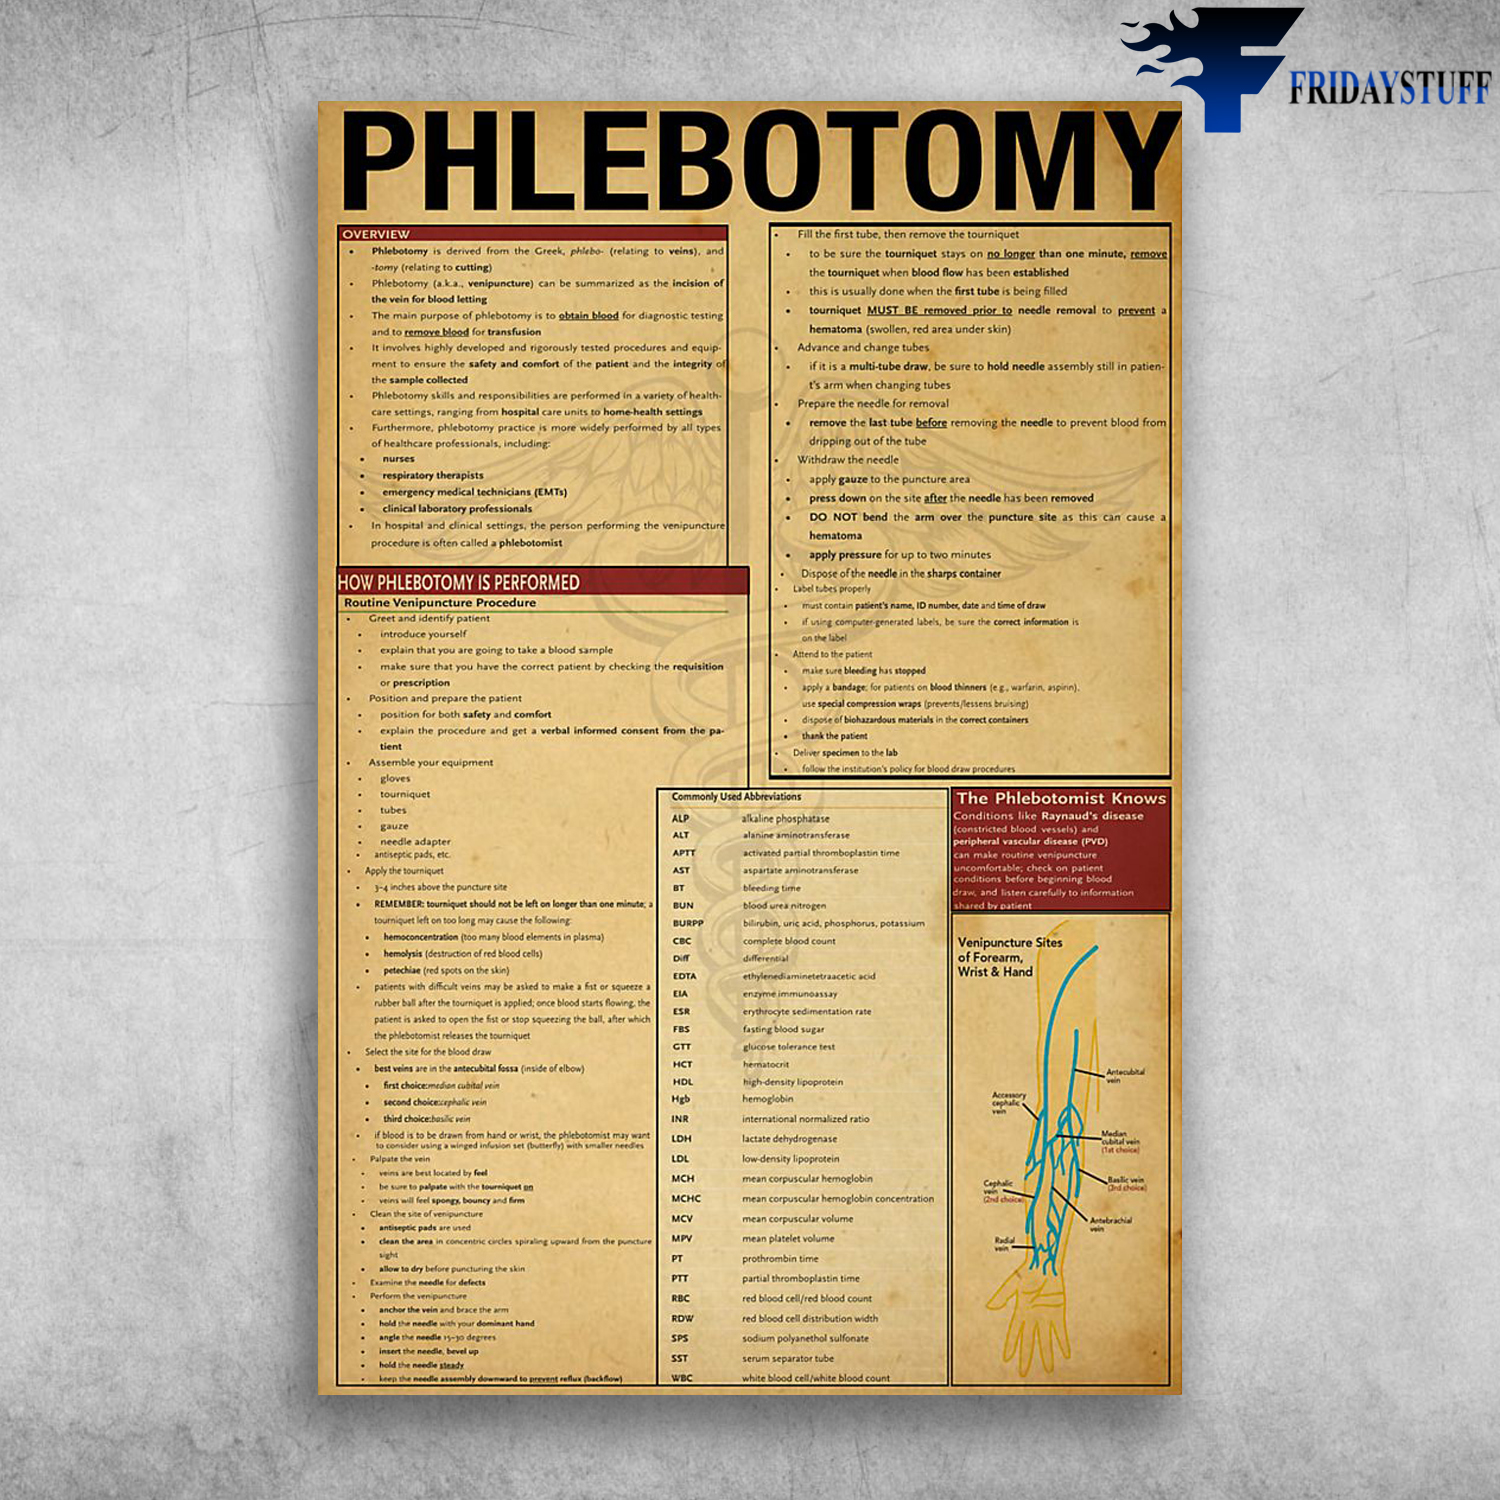 Phlebotomy How Phlebotomy Is Performed The Phlebotomist Knows